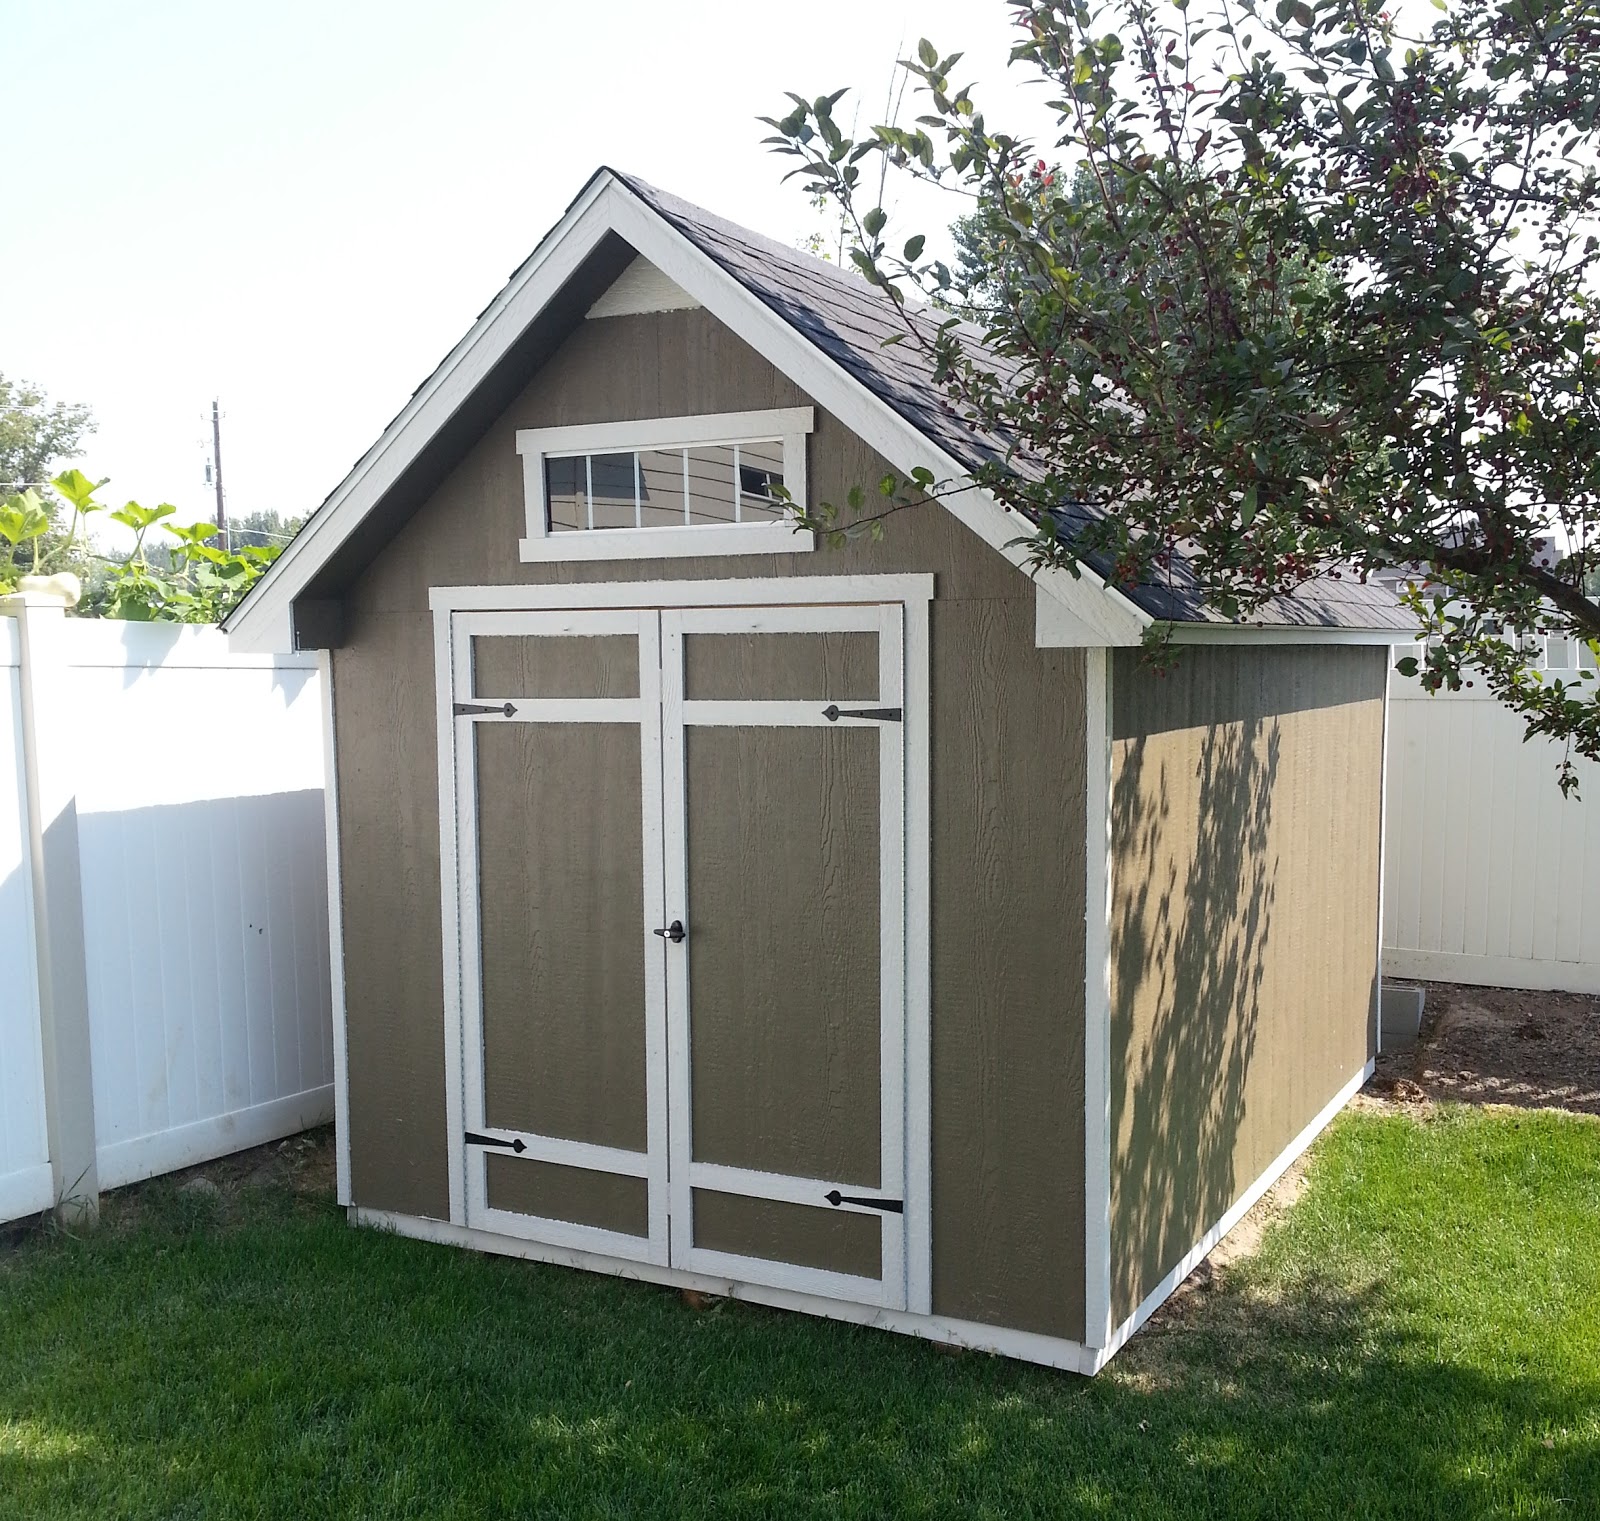 Outdoor storage bench, shed costco, diy storage shed ideas ...